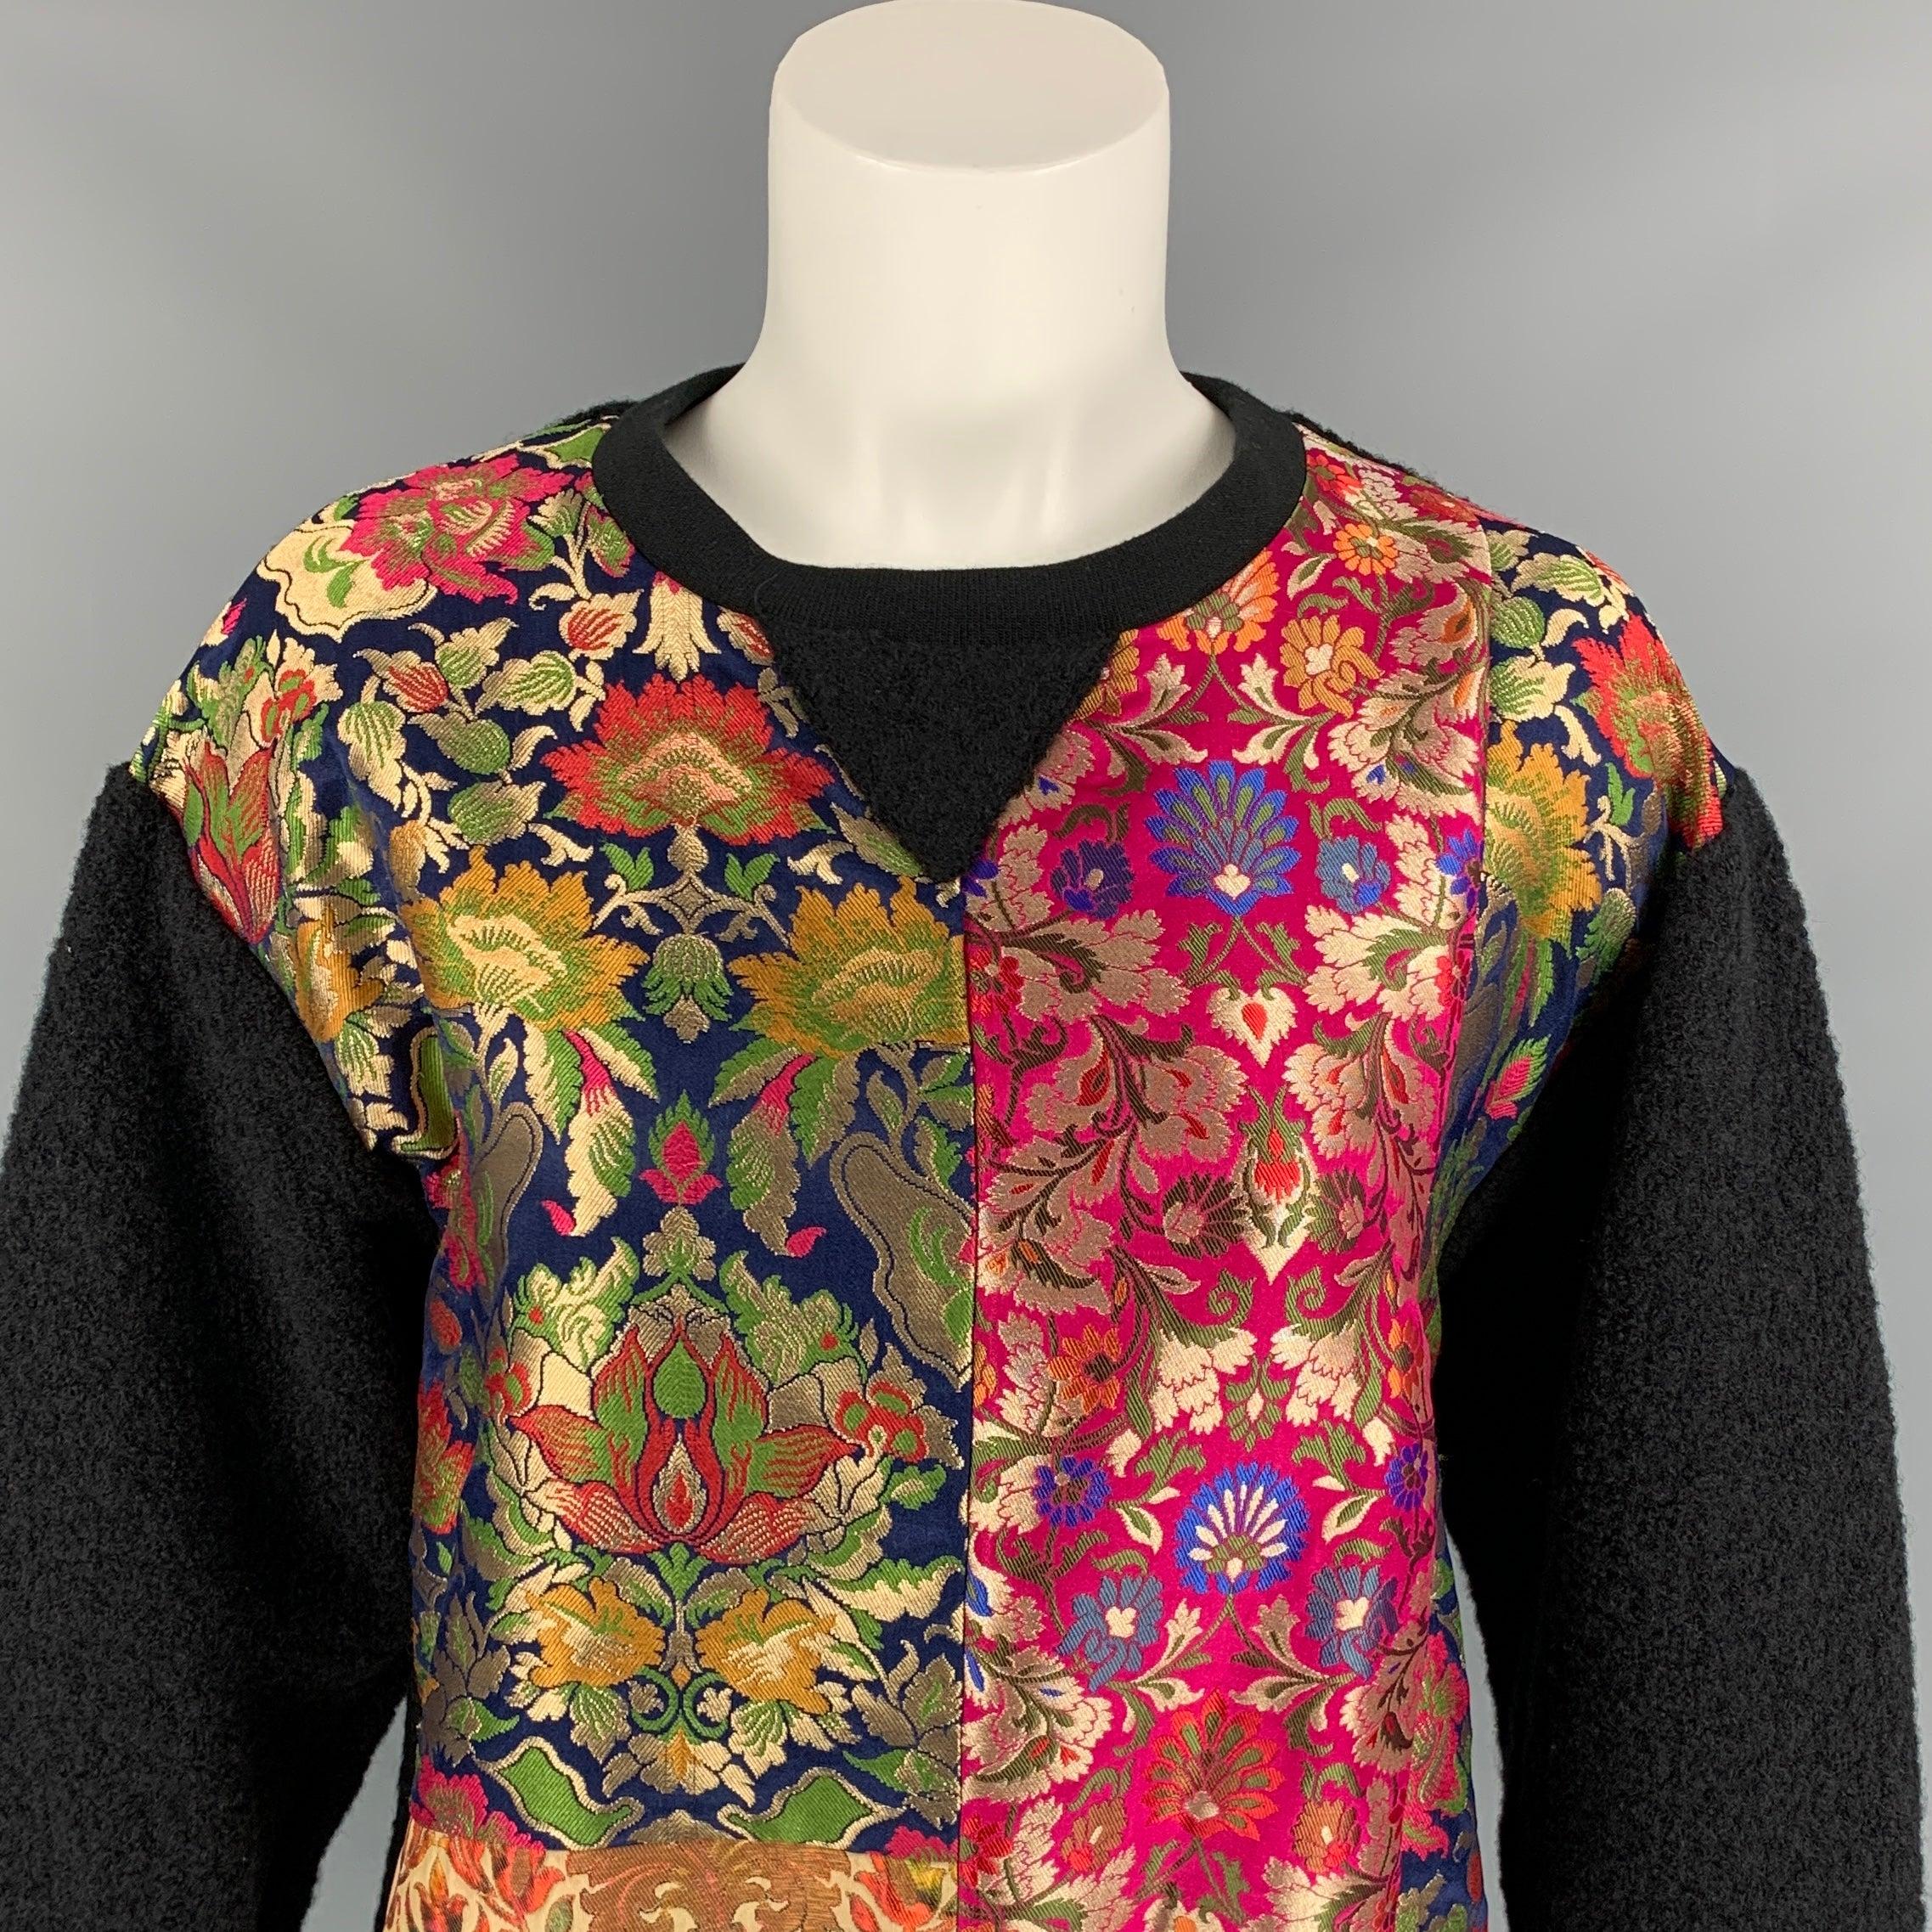 PRABAL GURUNG pullover comes in a black & multi-color wool / cotton featuring a patchwork design, ribbed hem, and a crew-neck. Made in USA.
New With Tags. 

Marked:   XS 

Measurements: 
 
Shoulder: 19 inches  Bust: 38 inches  Sleeve: 26.5 inches 